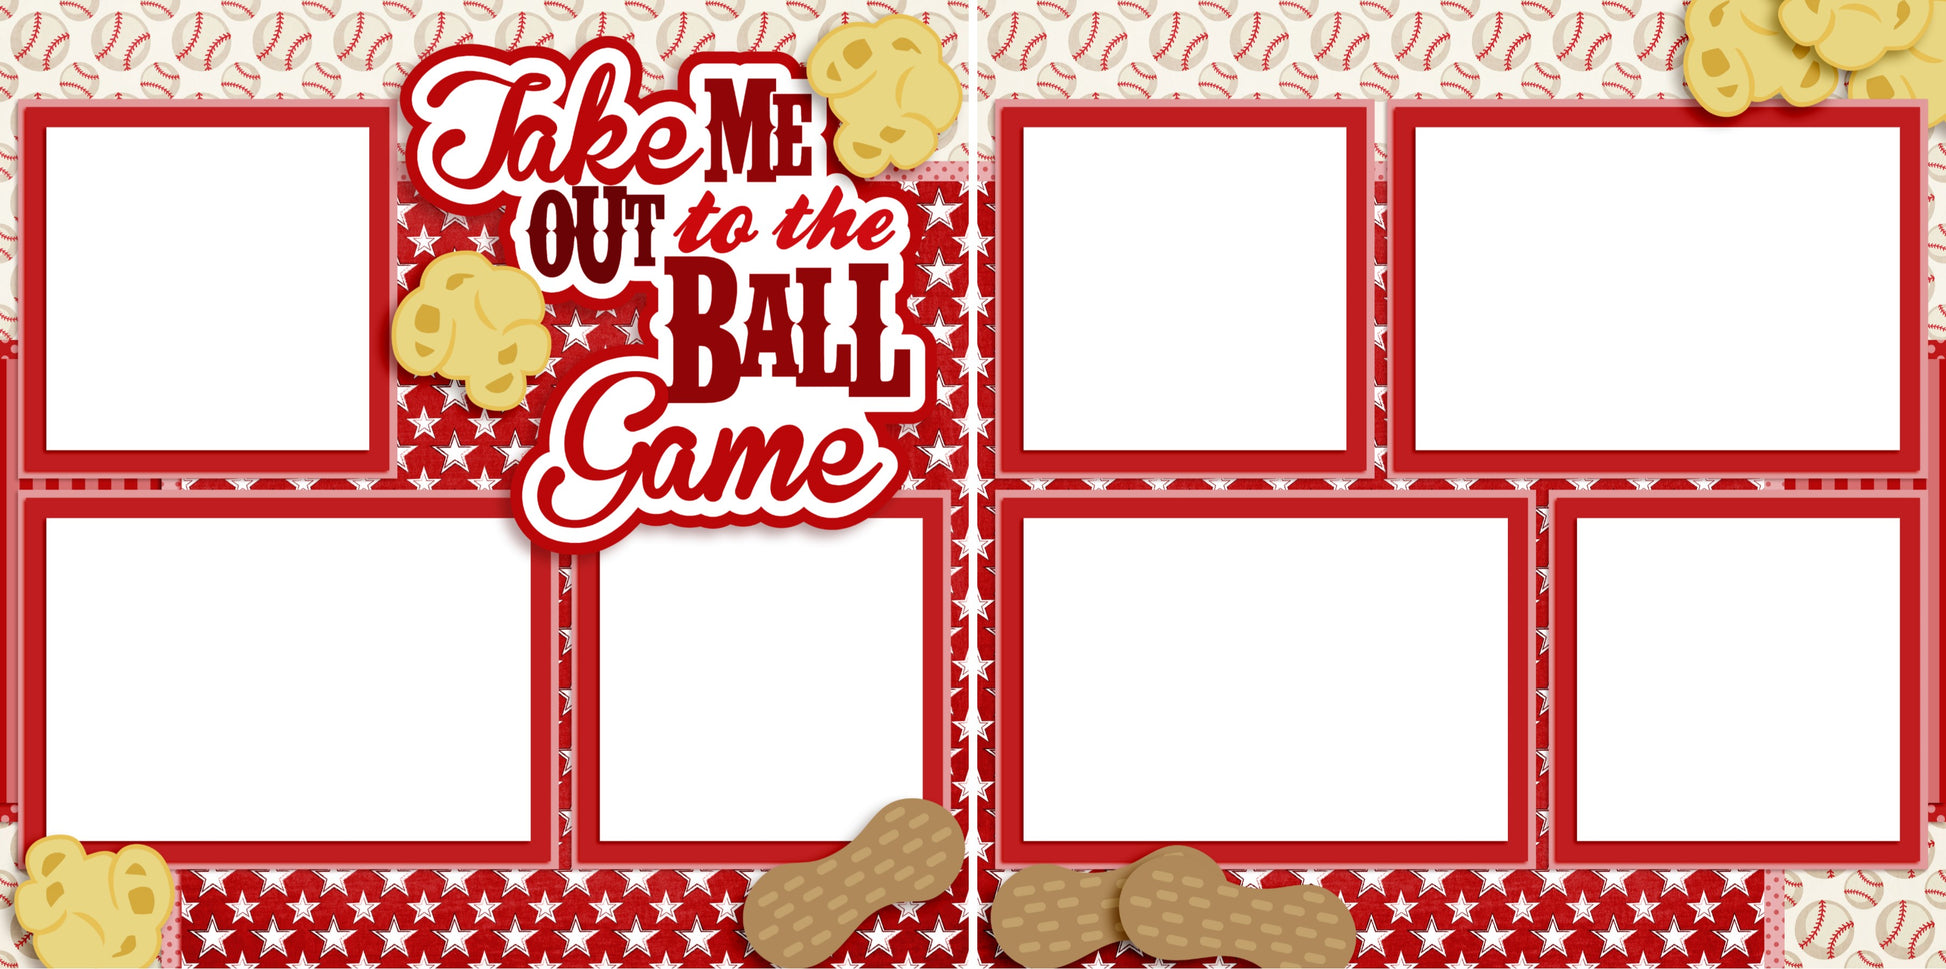 Take Me Out to the Ball Game Red - 3234 - EZscrapbooks Scrapbook Layouts baseball, Sports